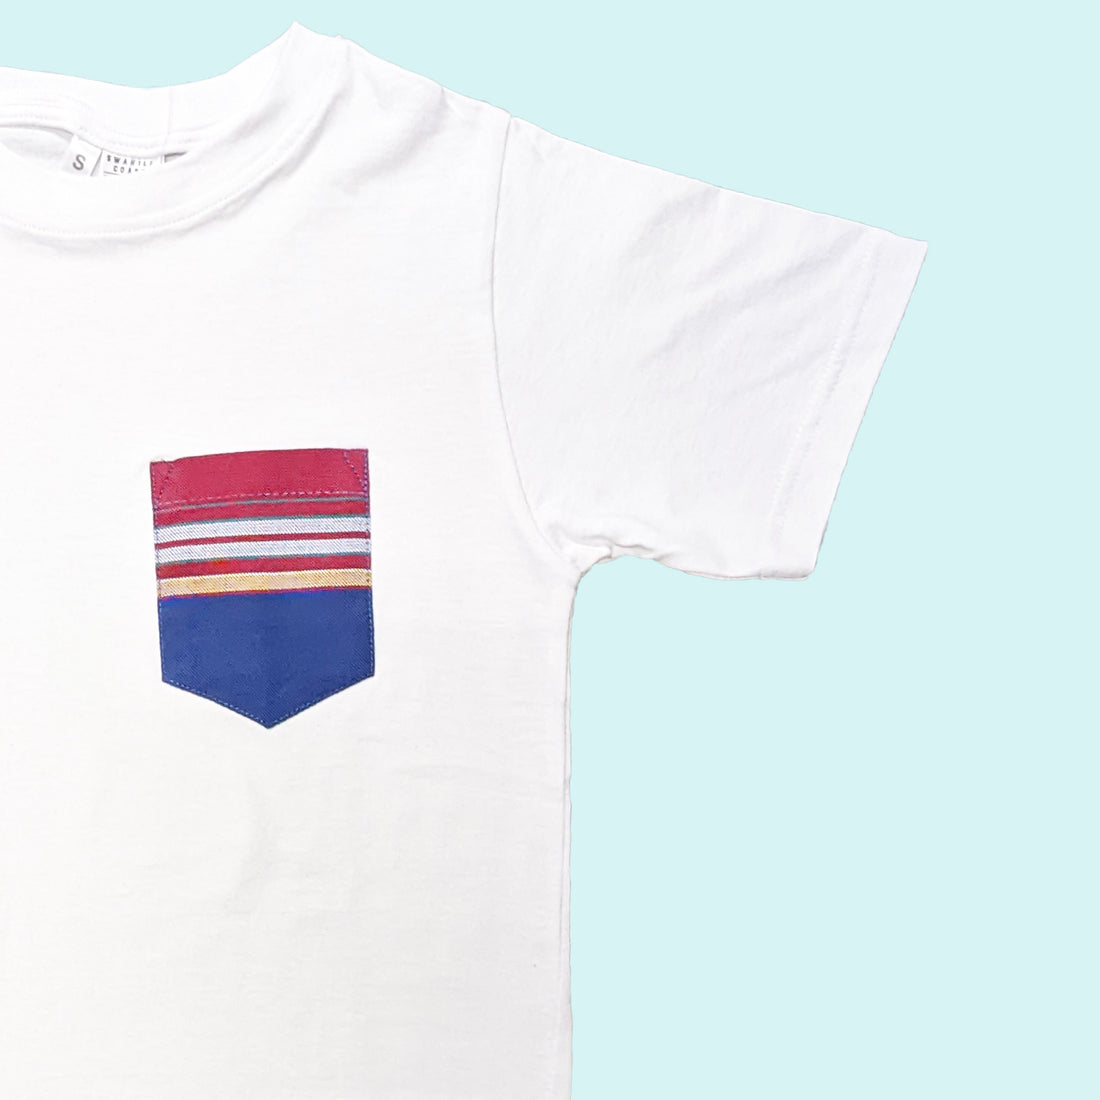 Kenyan Pocket Tee - White with Navy and Red Pocket